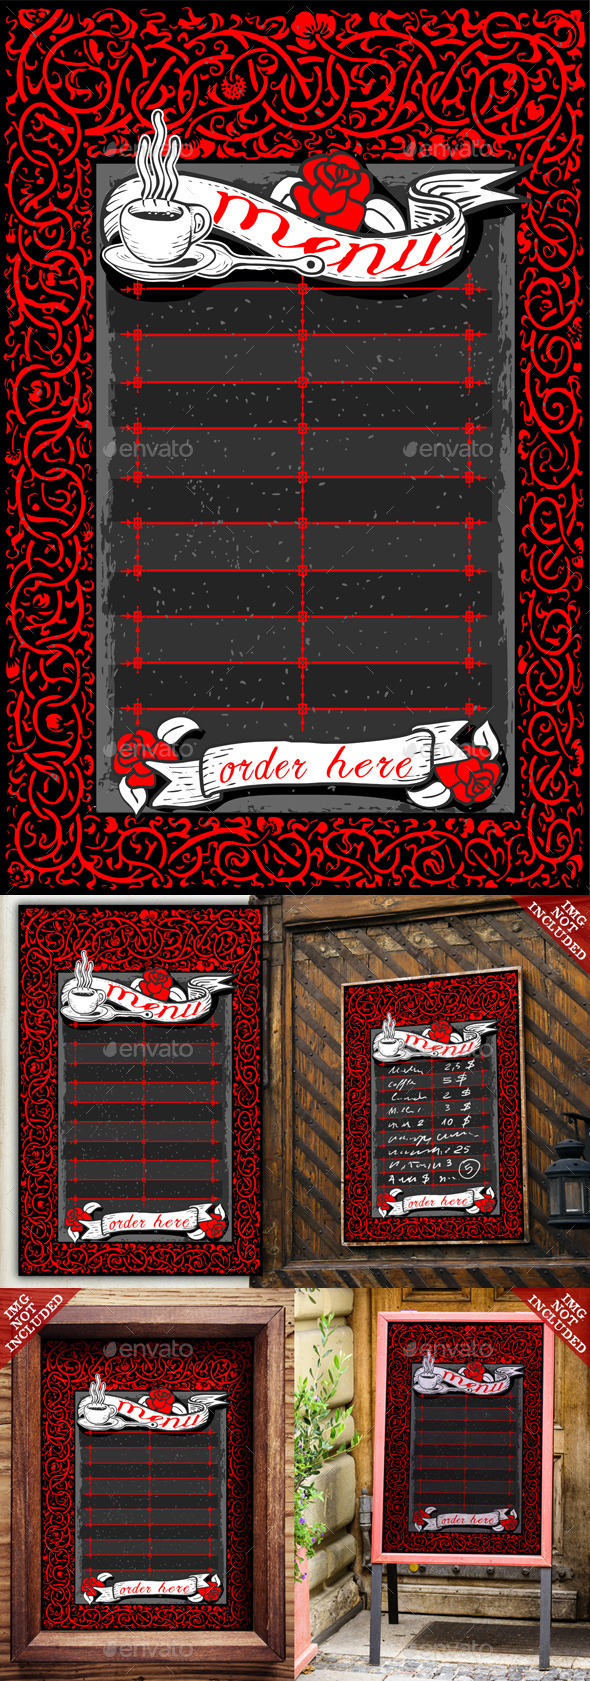 Vintage Dark Menu with Red Roses and Banners